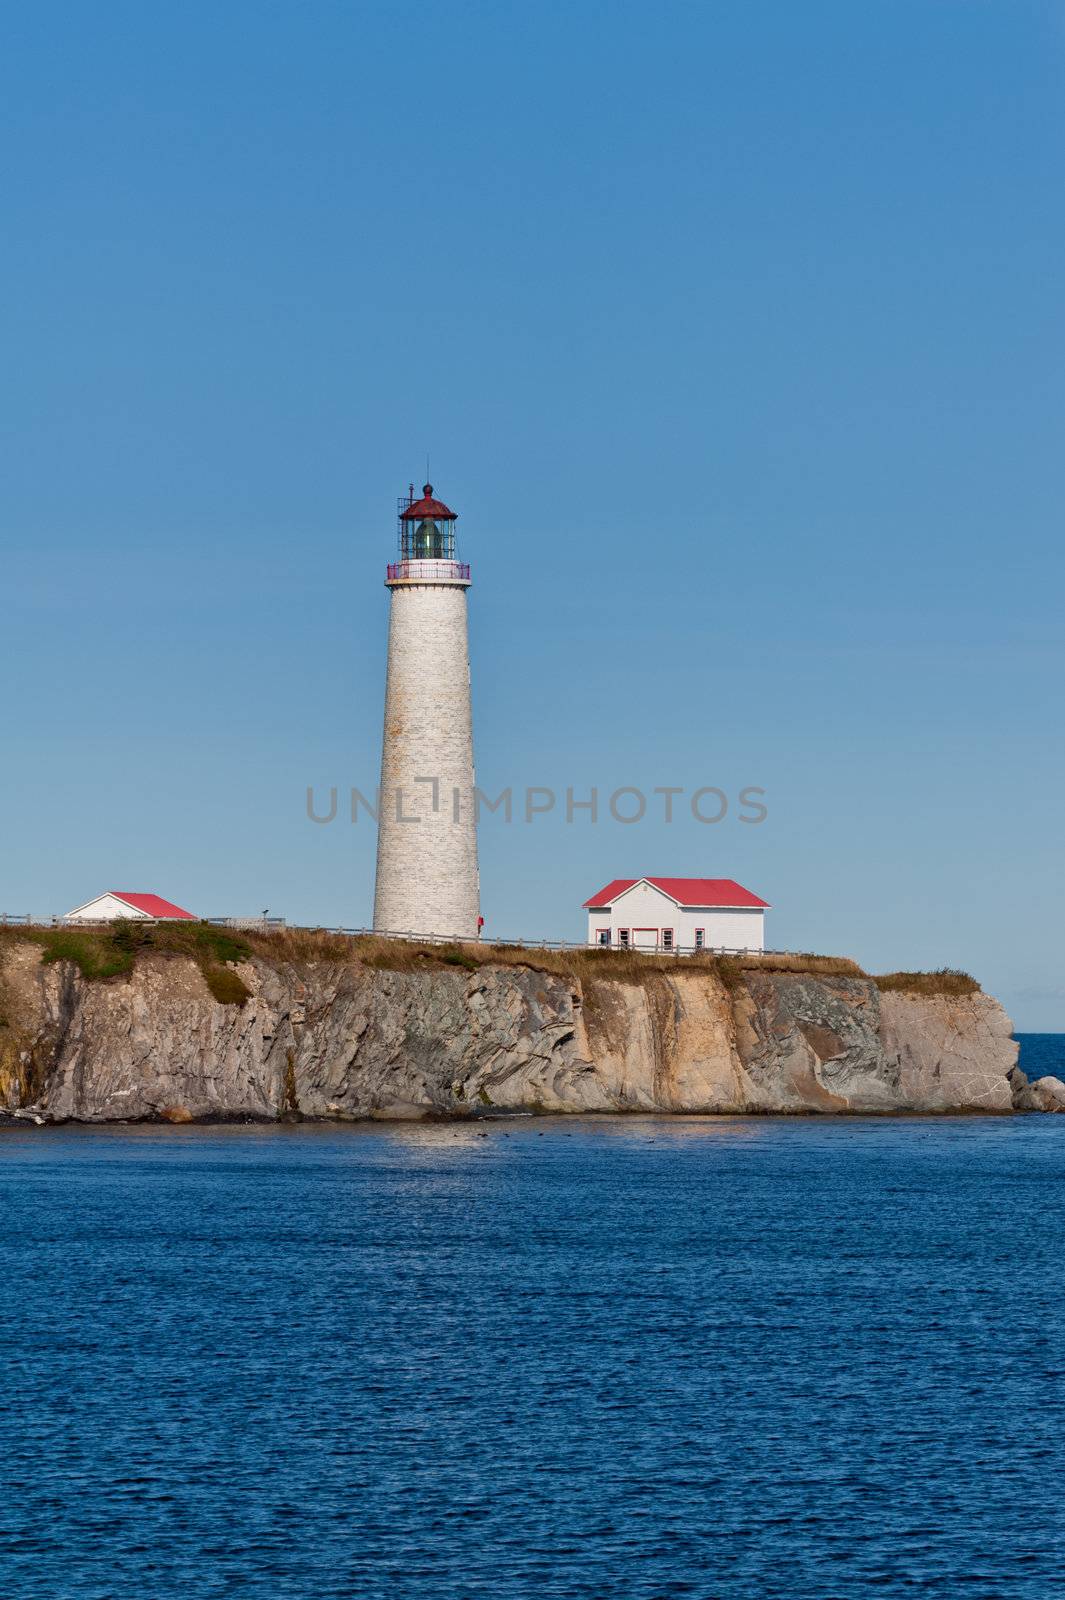 Cap des rosiers lighthouse during a cloudless day, Quebec, Canada